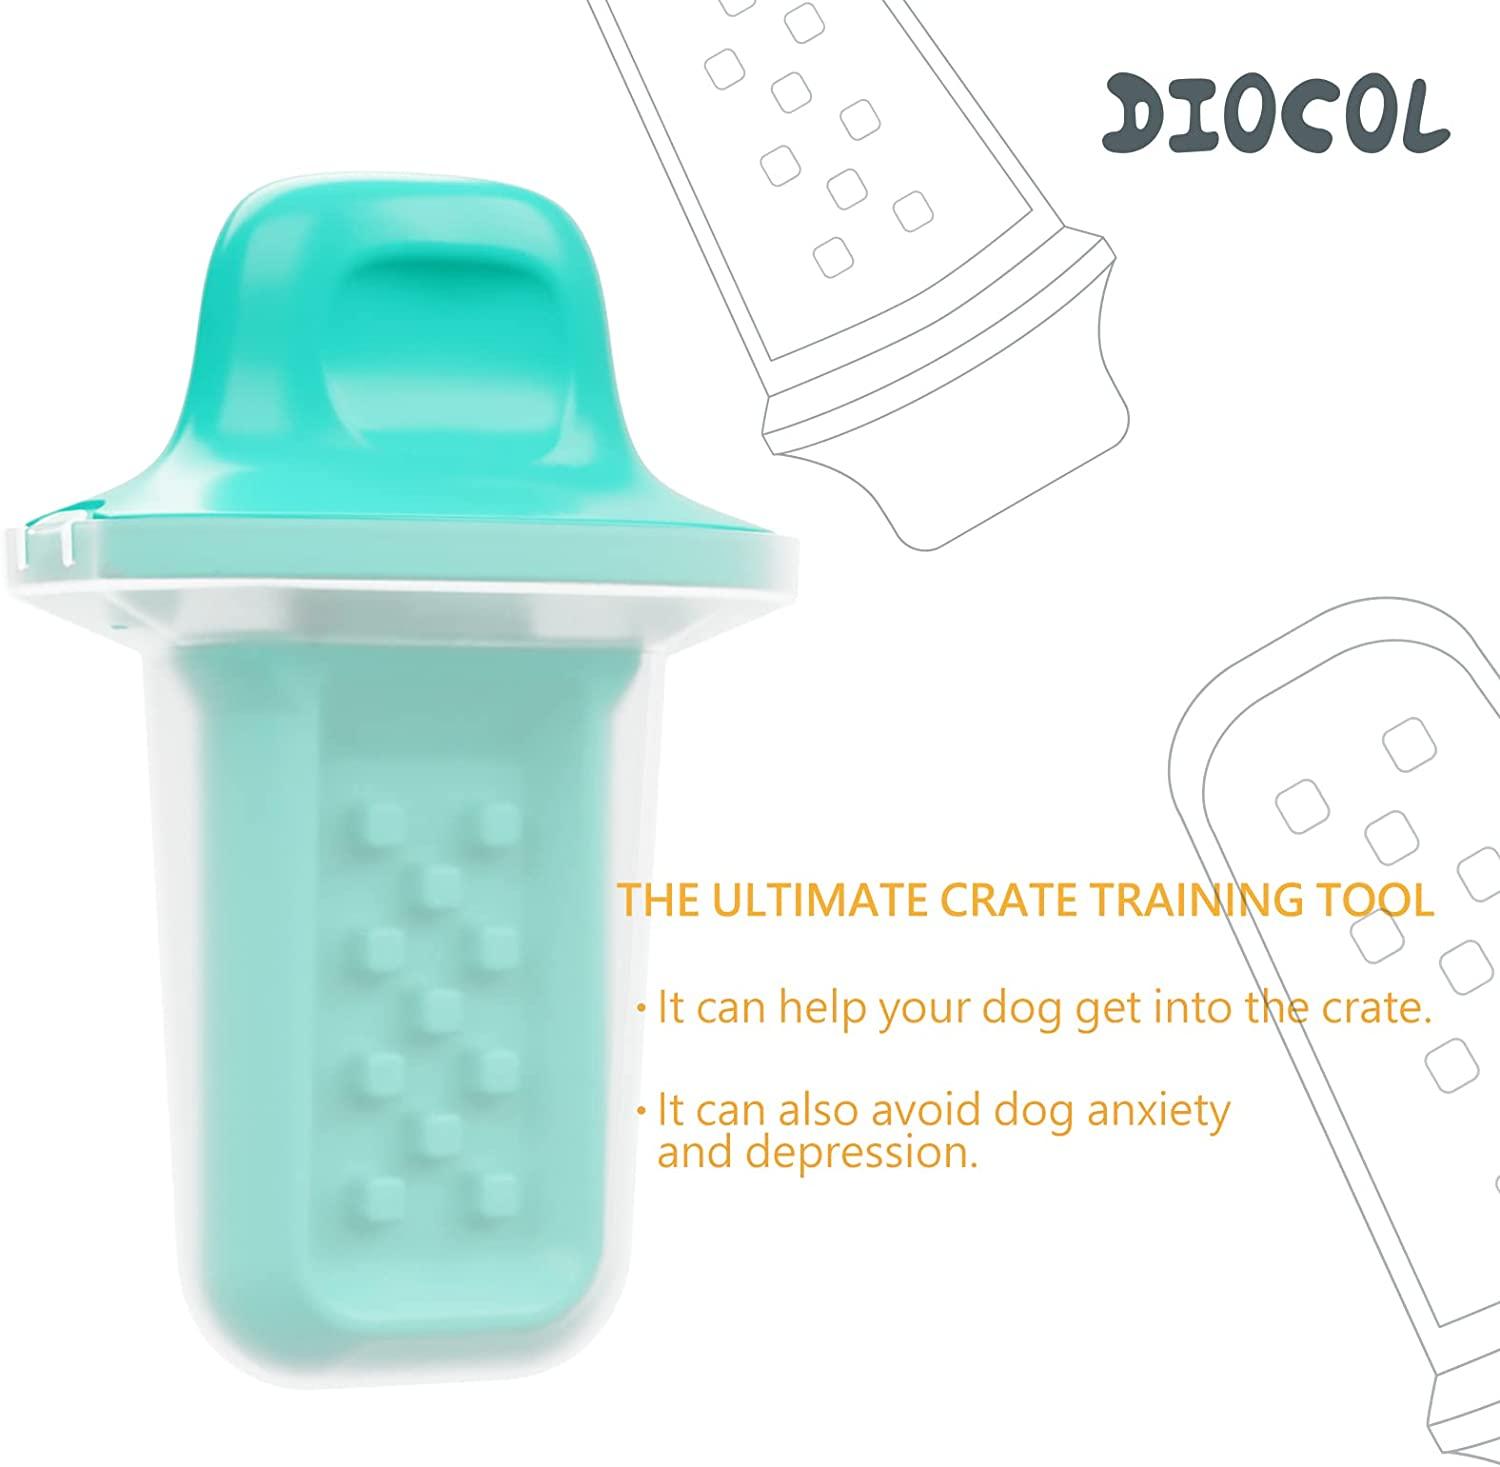 DIOCOL Dog Training Toys/Aids, Dog Peanut Butter Toy for Crate Training,  Fixed On The Crate to Reduce Anxiety, Dog Therapy Dispenser, Dog Crate Toy  Green